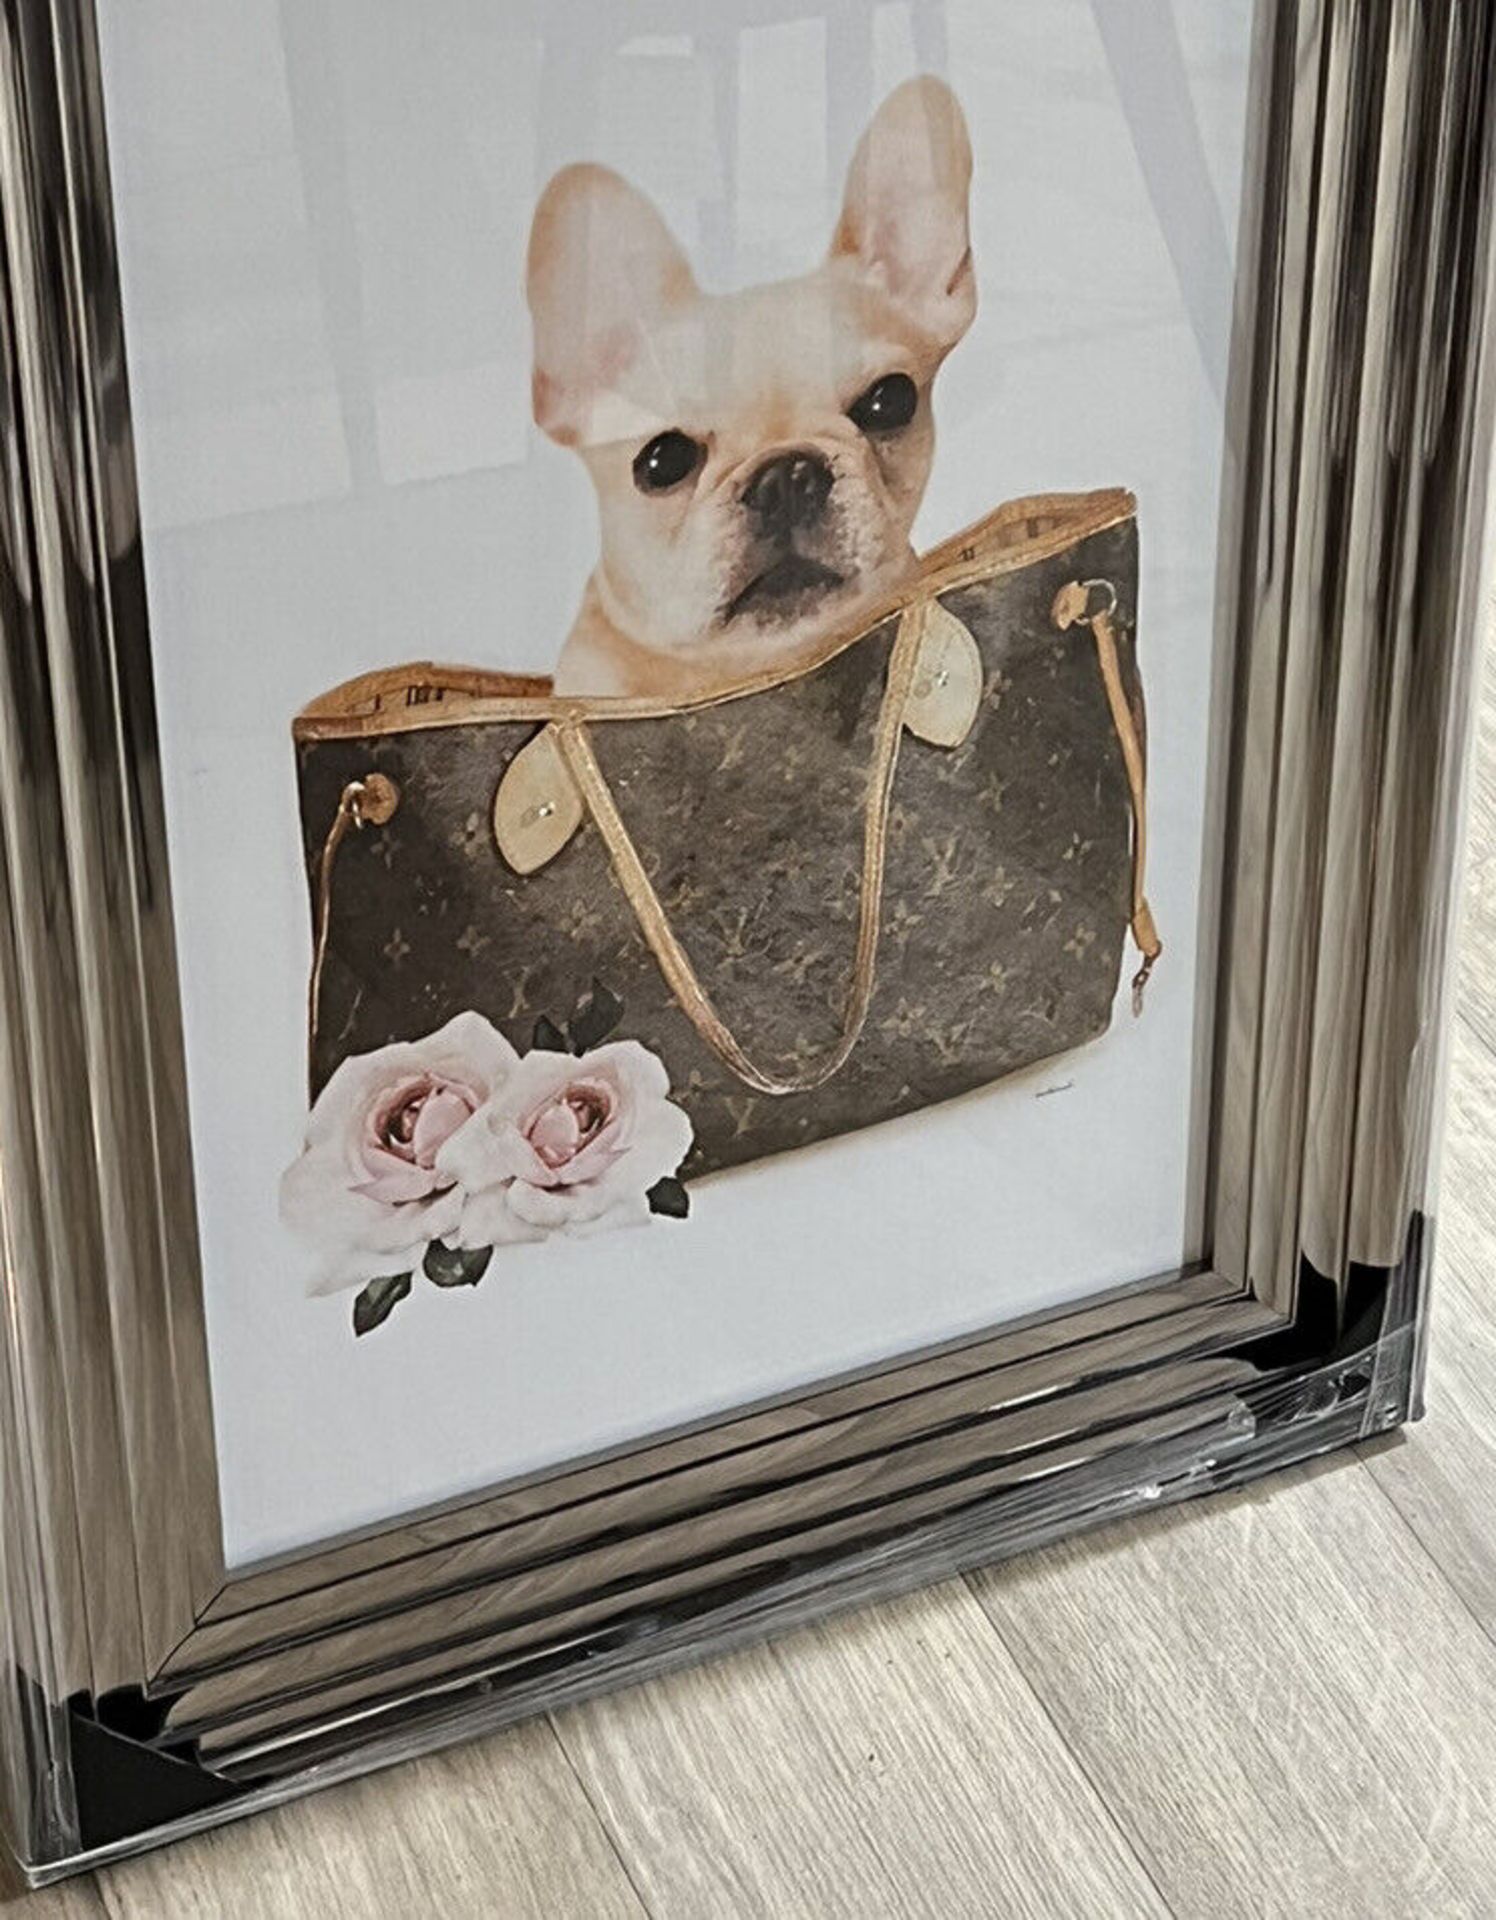 Designer Frenchie in a Handbag art Piece - Brand New - Hand Embellished Art in Three Tier Frame - Image 2 of 4